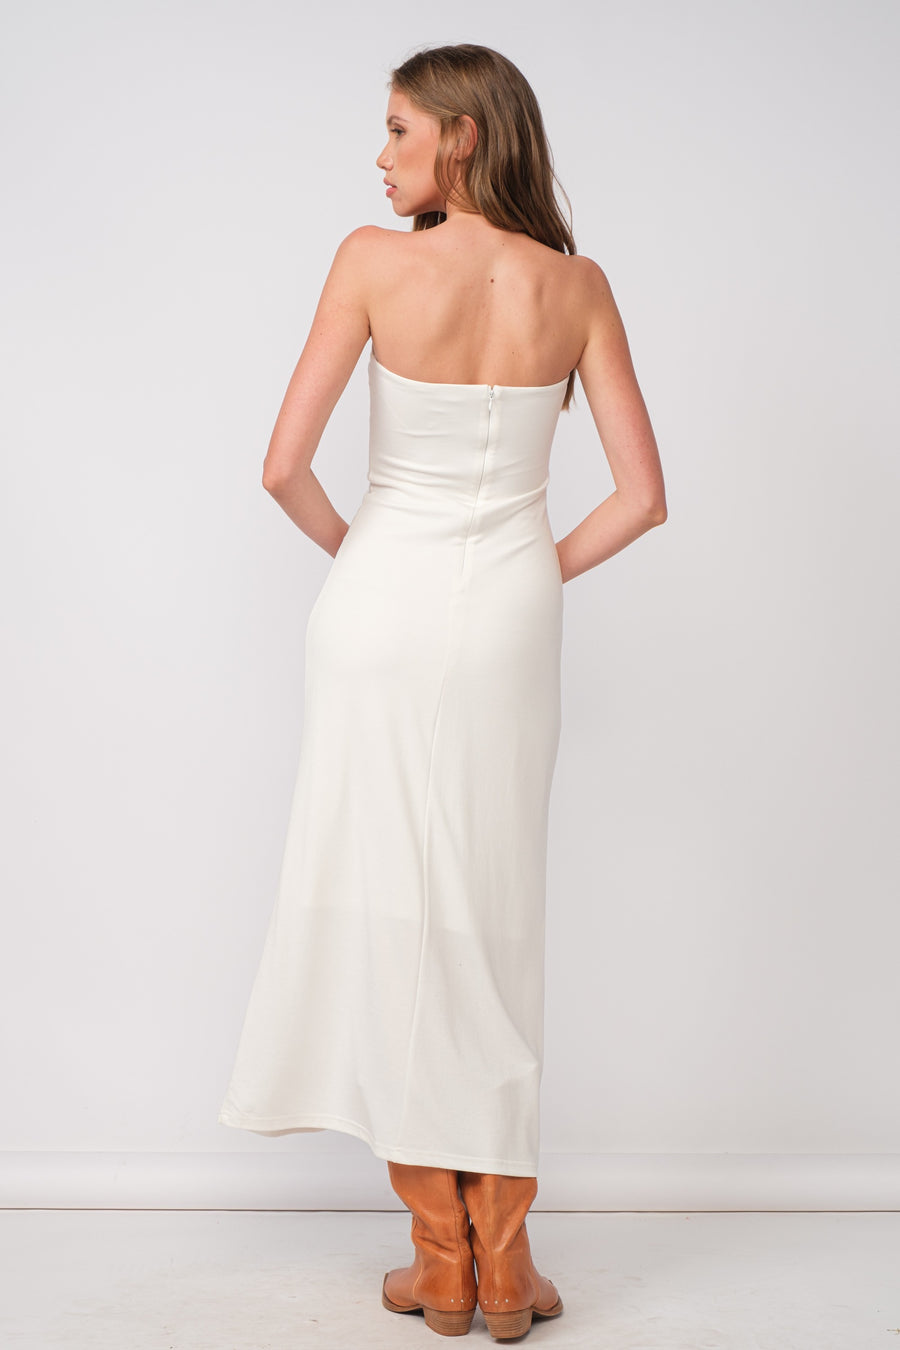 Strapless Maxi dress in the color white.